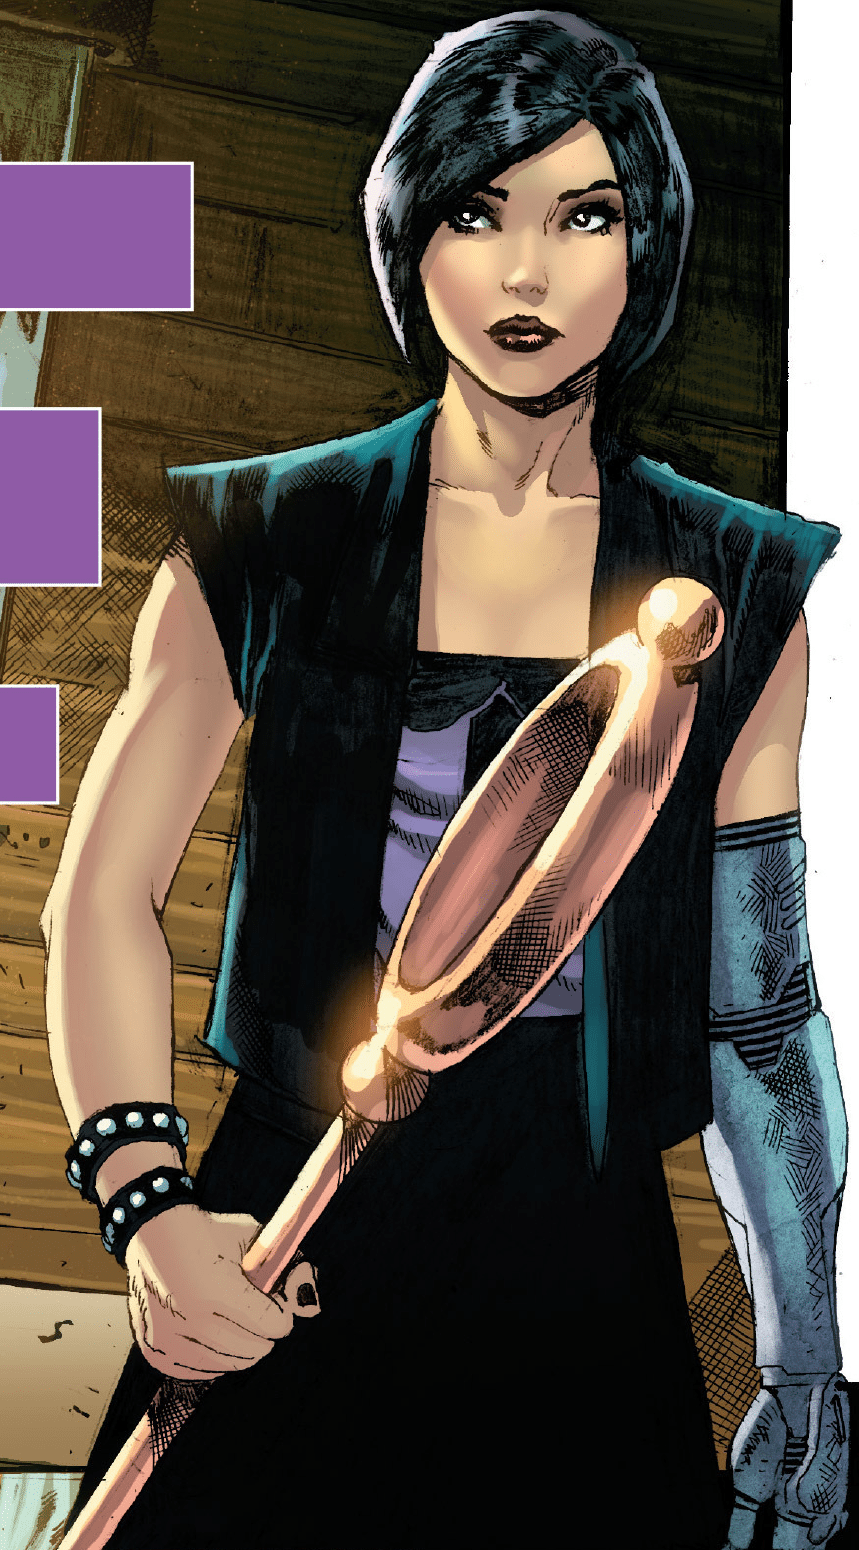 41 Hot Pictures Of Nico Minoru That Will Make You Begin To Look All Starry Eyed At Her 536